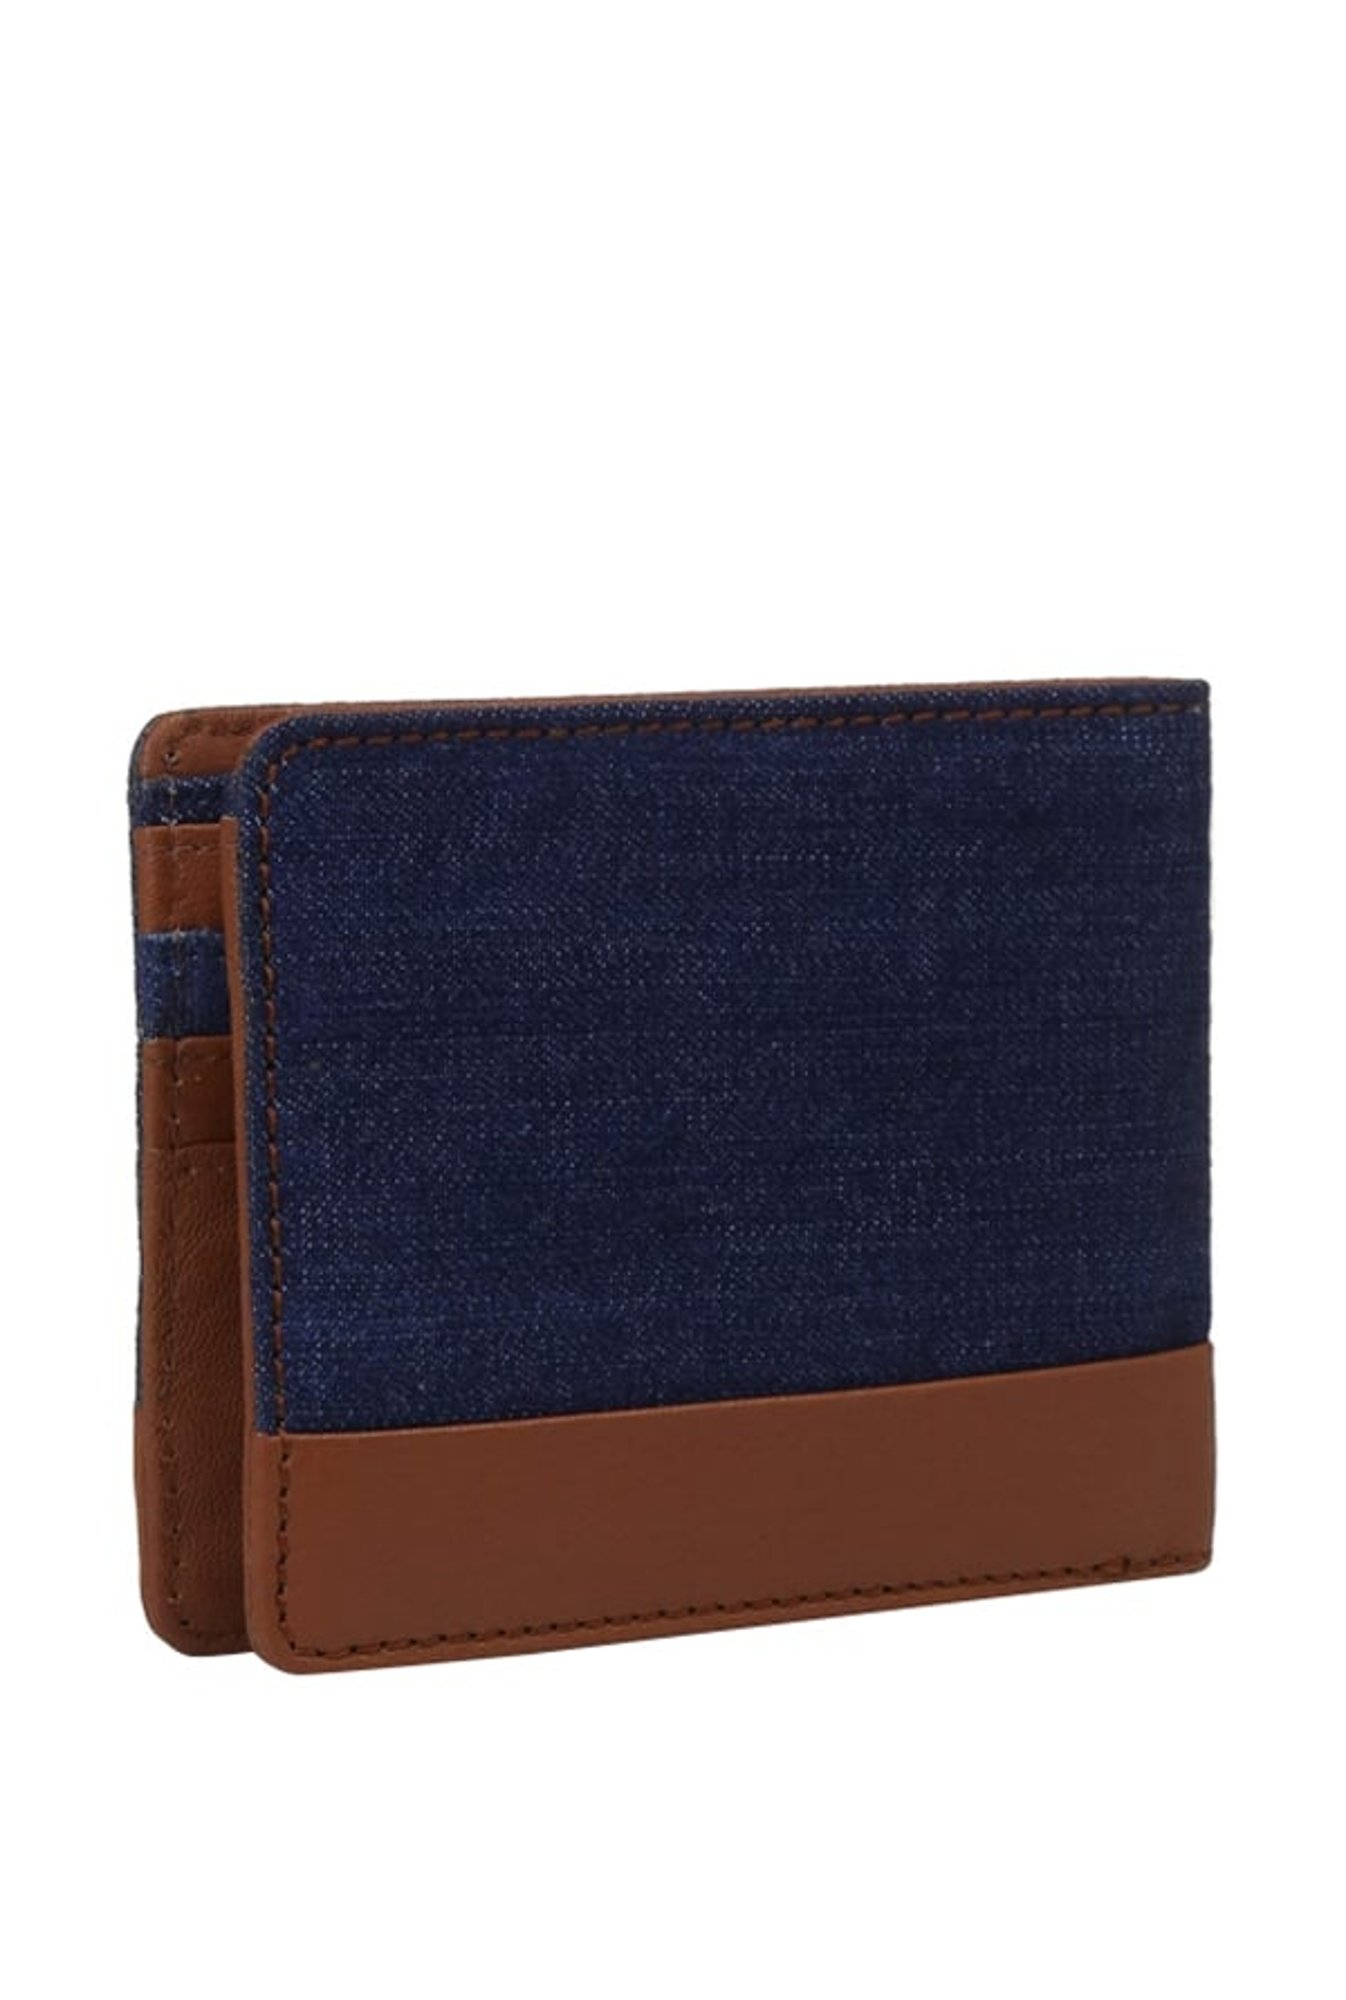 Fastrack Women Casual Blue Artificial Leather Wallet Blue - Price in India  | Flipkart.com